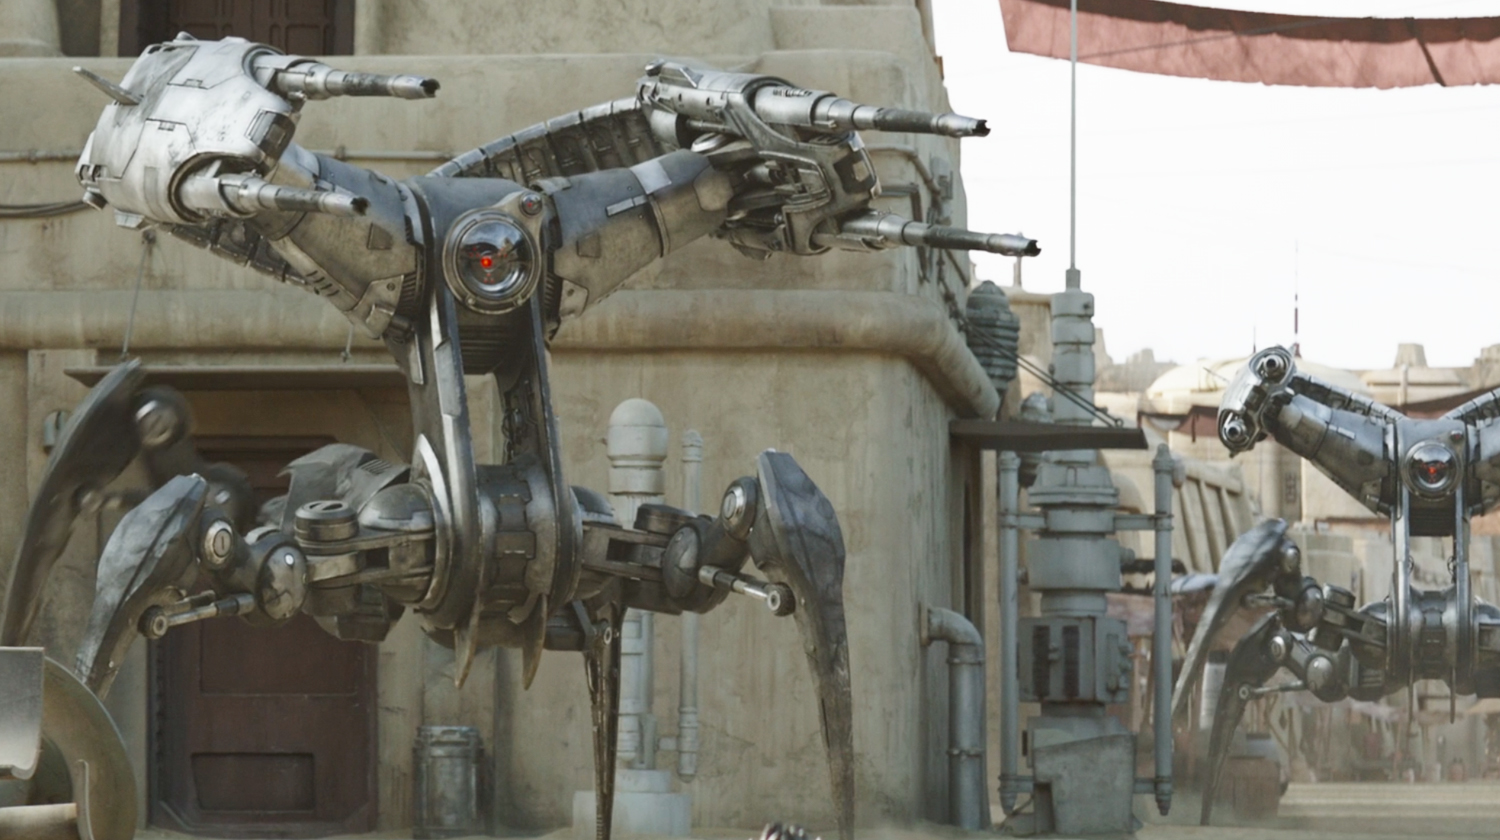 The Scorpenek droids were nice, but it might have been nice to see repurposed imperial hardware too